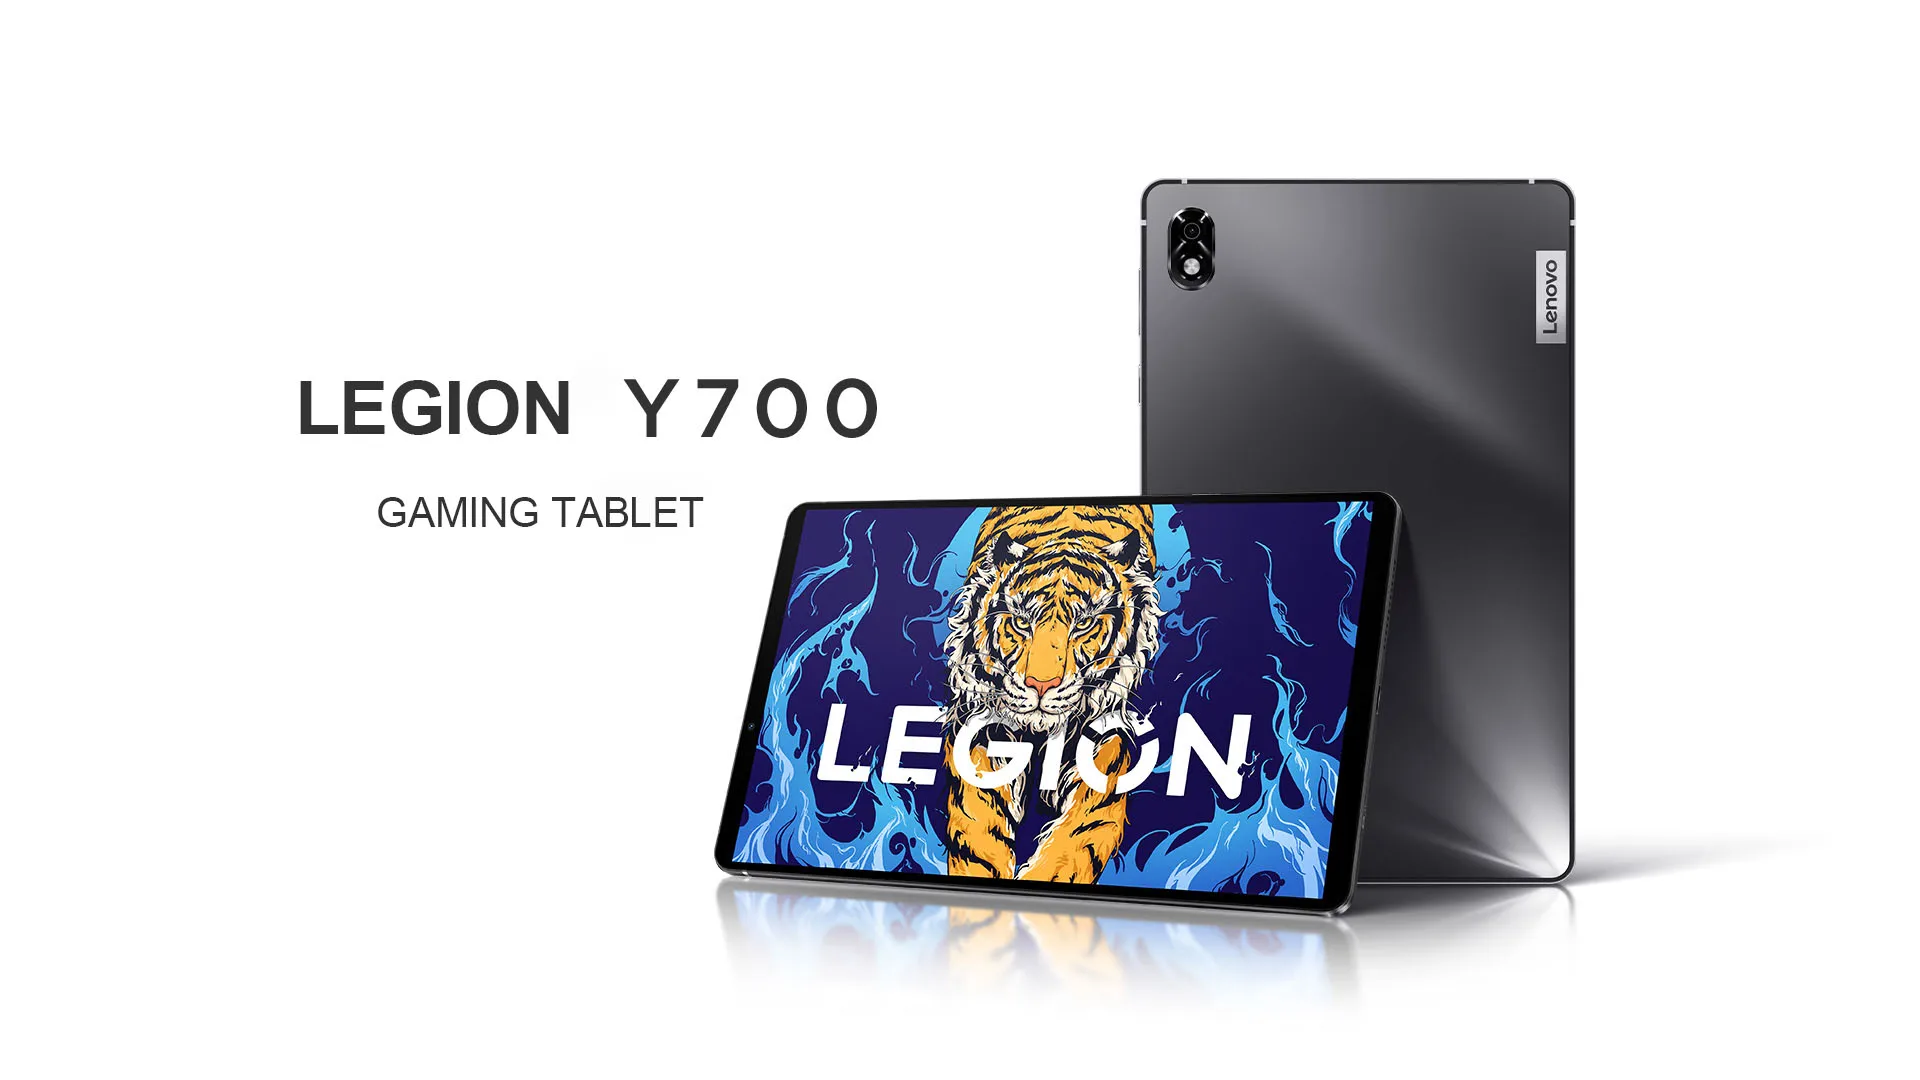 Lenovo Legion Y700 Tablet Gaming Snapdragon 870 Octa Core 6550mAh Battery 45W Charger 8.8'' 120Hz 13MP Camera Android 11 8gb ddr3